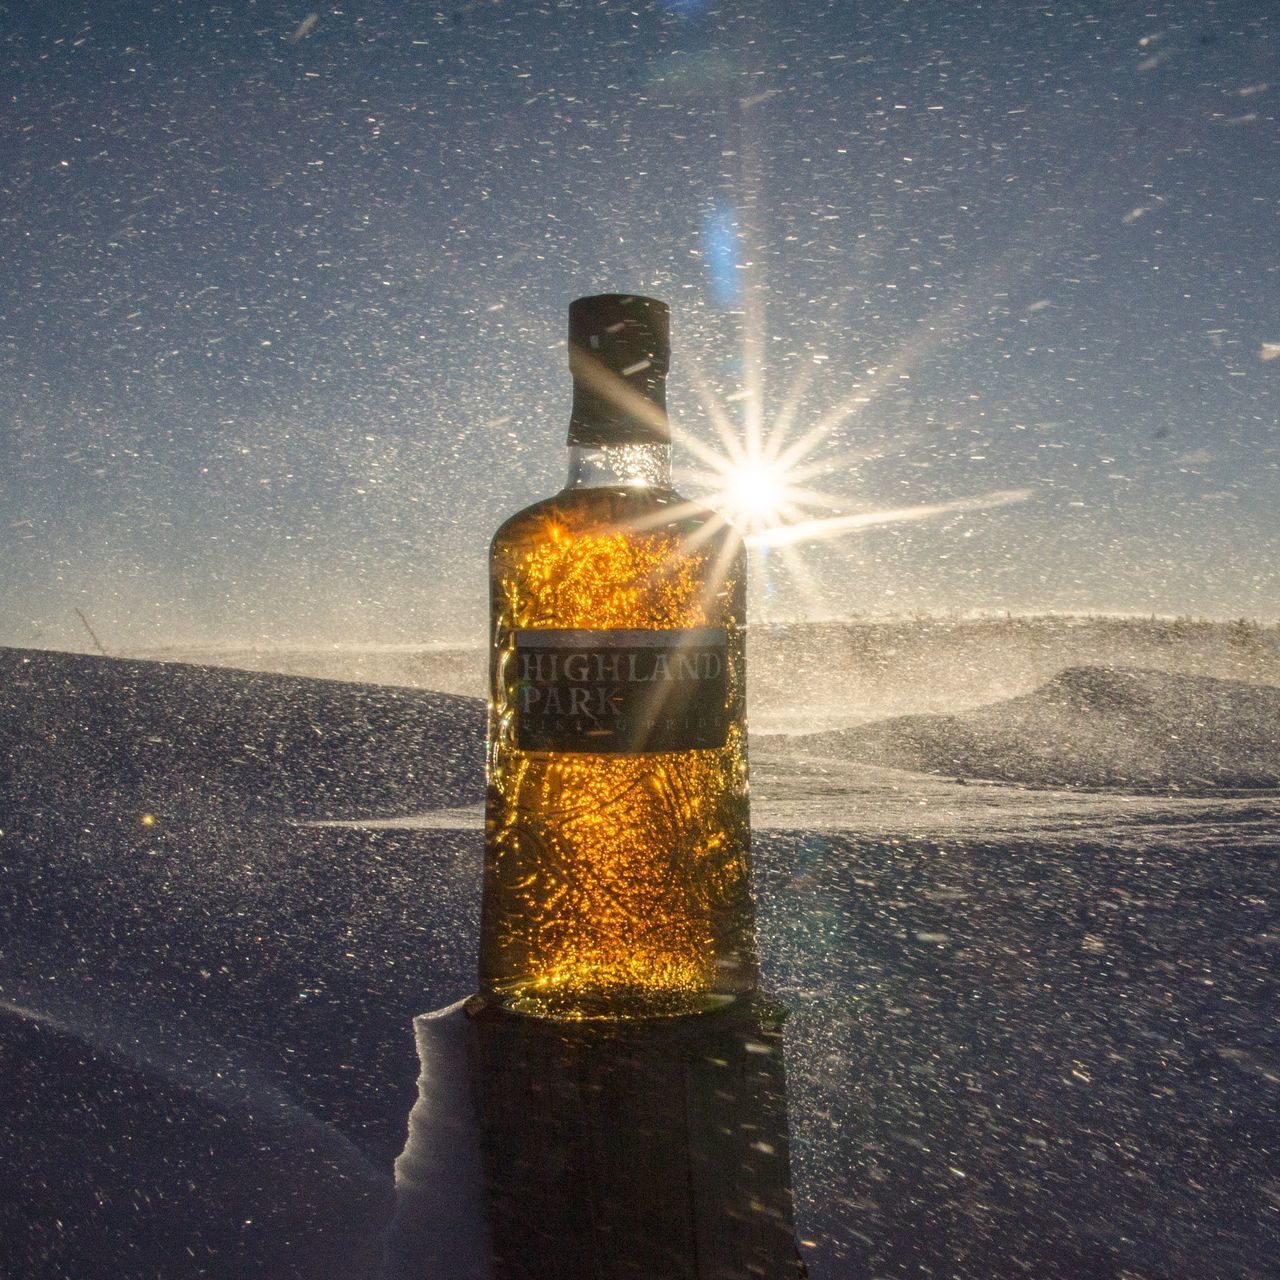 DIGITAL COMPOSITE IMAGE OF GLASS AND BOTTLE AGAINST SKY